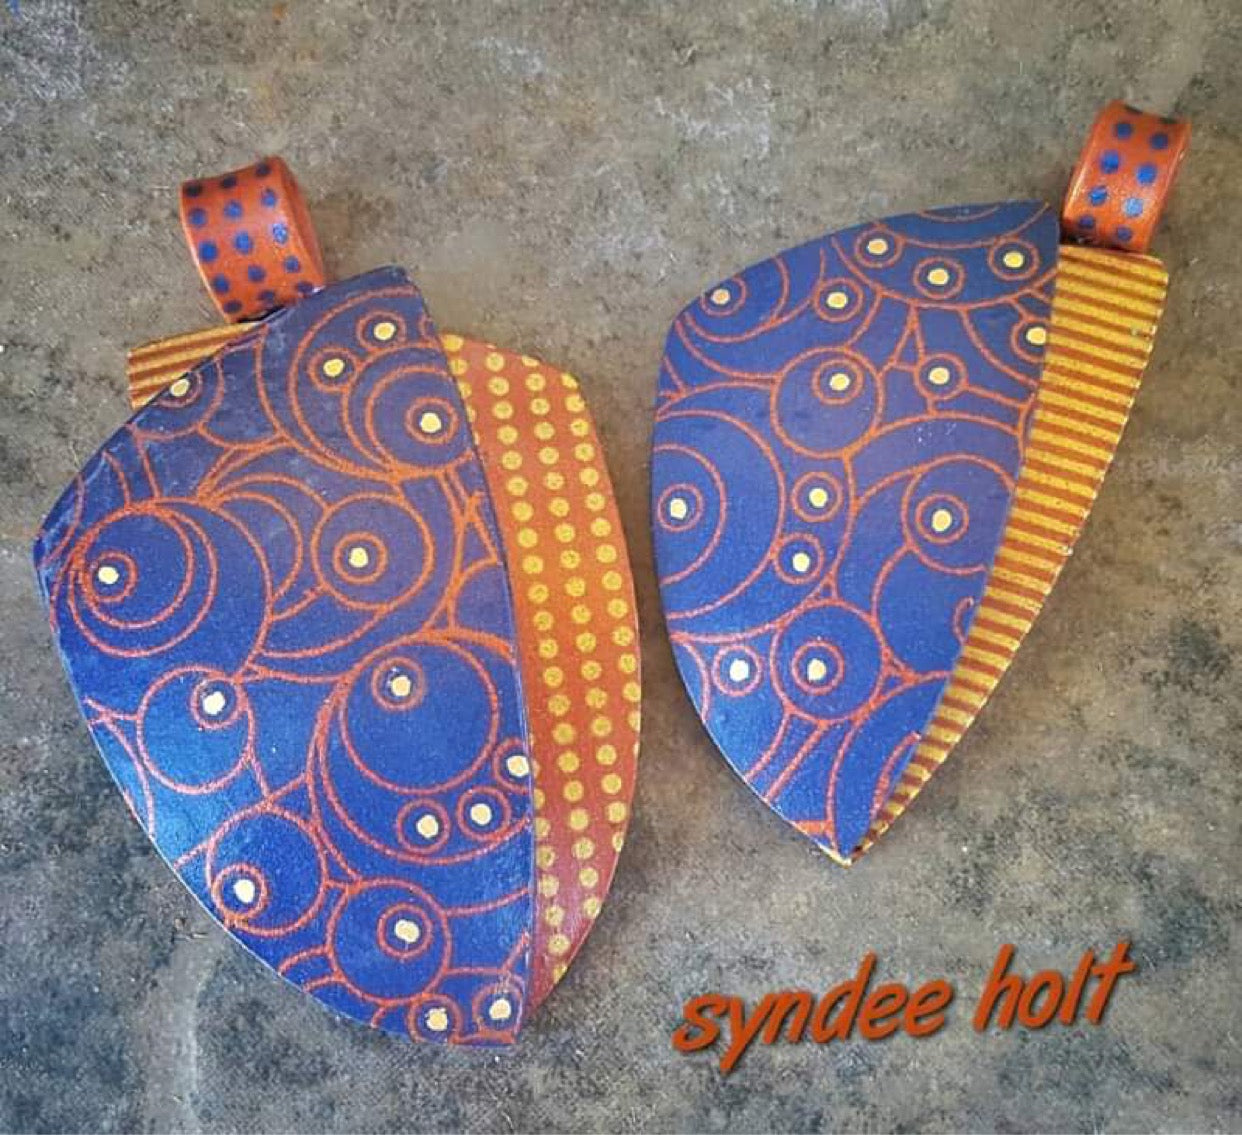 Syn’s #13 Three patterns in one Modern circles ovals Silkscreen For Crafting Polymer Clay + Mixed Media